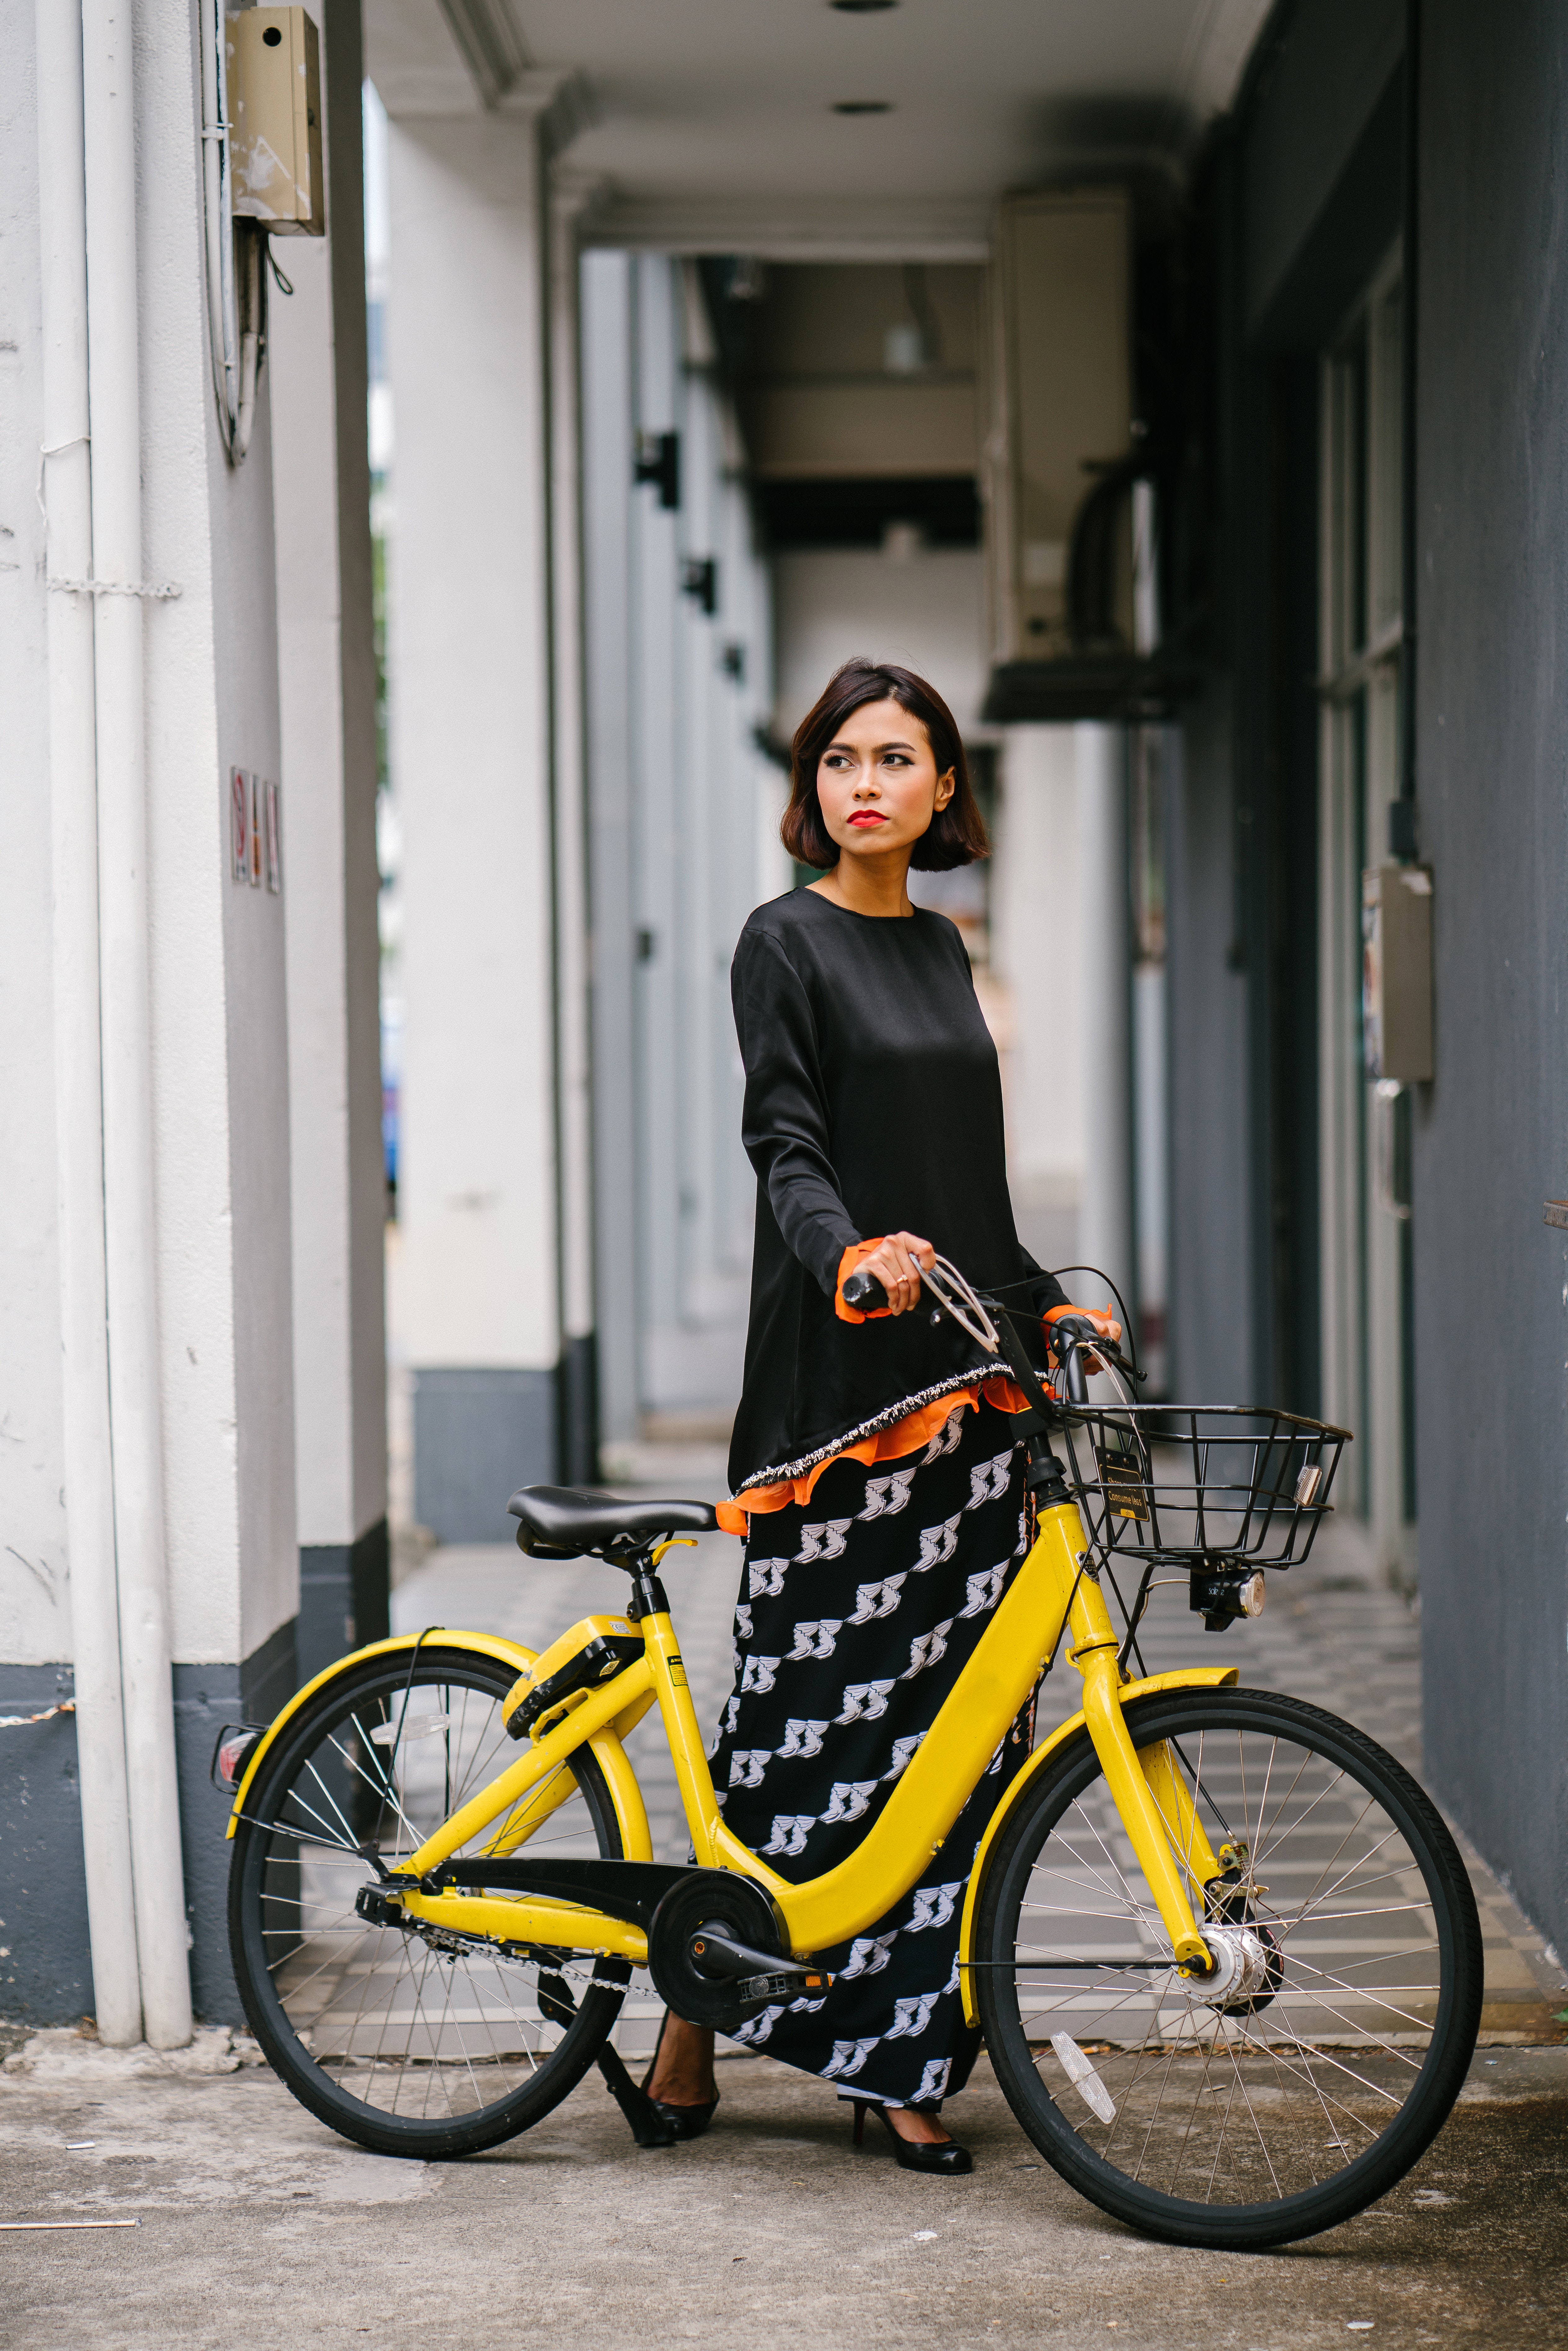 A woman holding a yellow bike at daytime